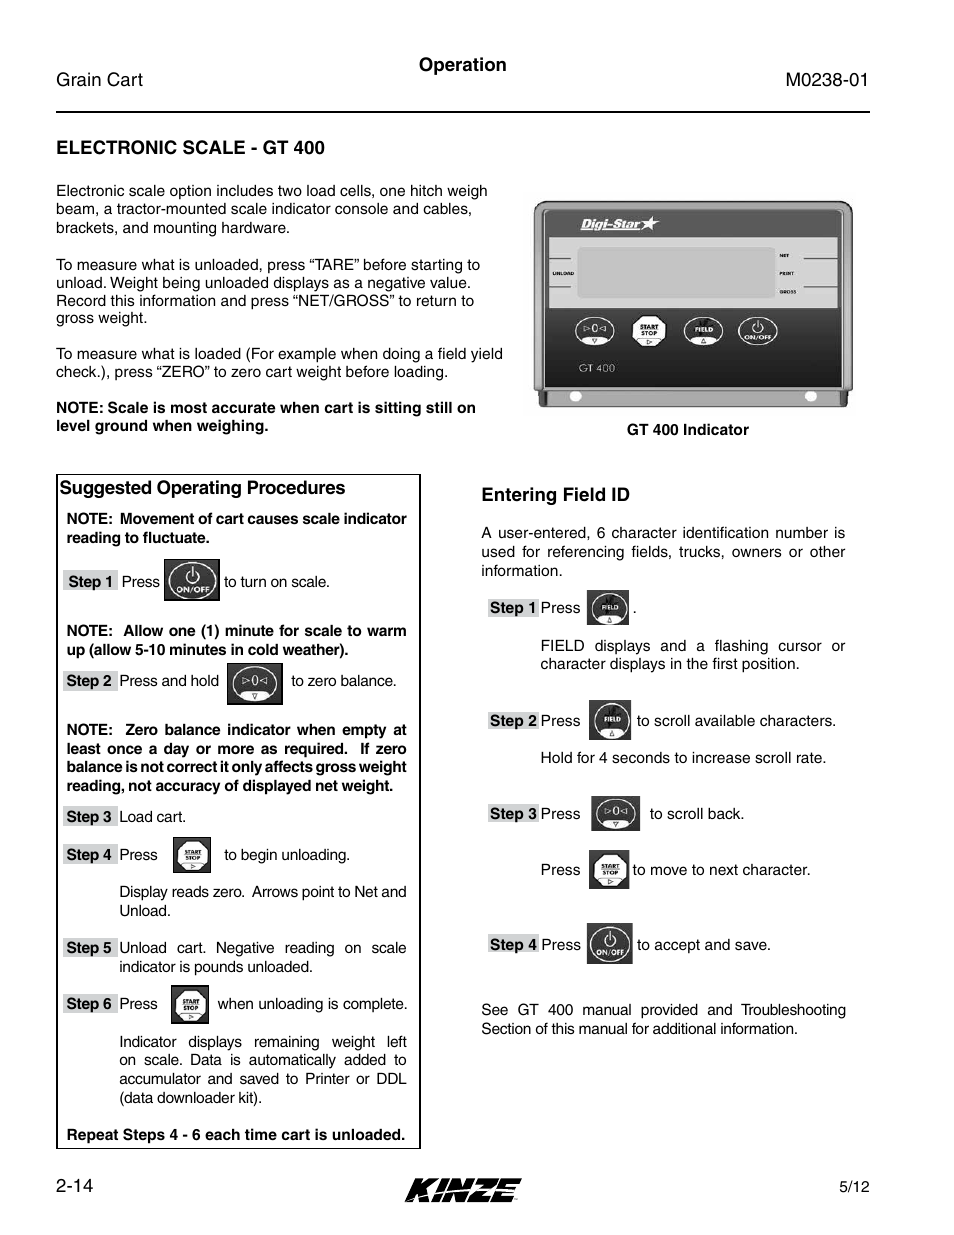 Electronic scale - gt 400, Electronic scale - gt 400 -14 | Kinze Grain Carts Rev. 7/14 User Manual | Page 28 / 70